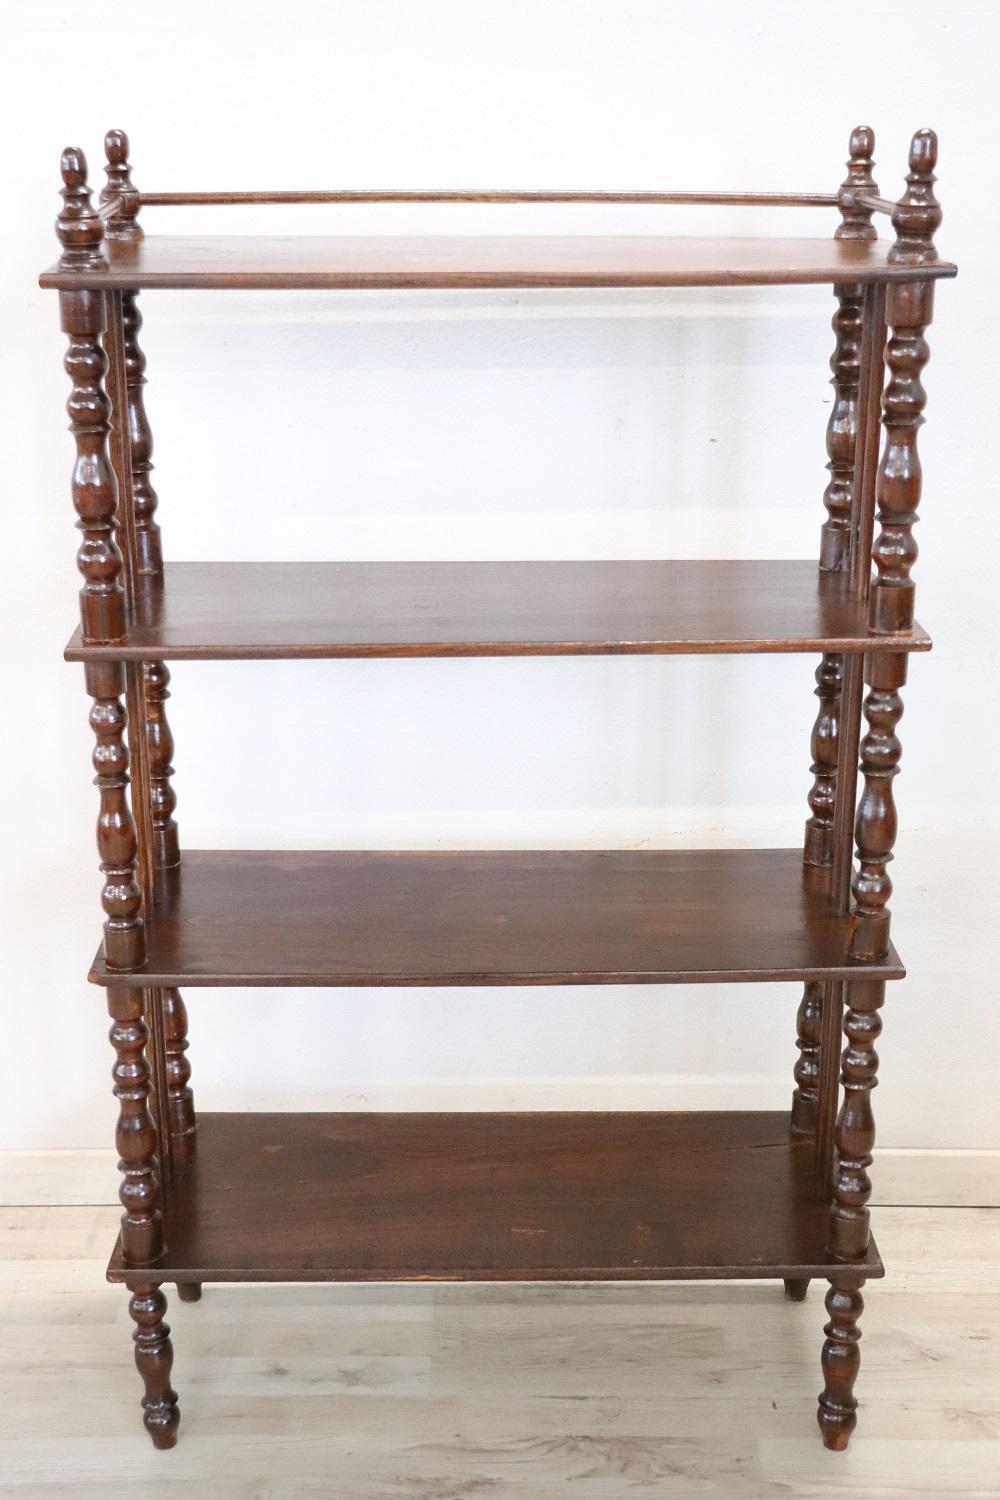 19th century of the period Louis Philippe italian antique étagère. Made in solid oak wood and characterized by refined turned columns. Equipped with four shelves available to display your objects or books. The distance between the shelves is 30 cm /